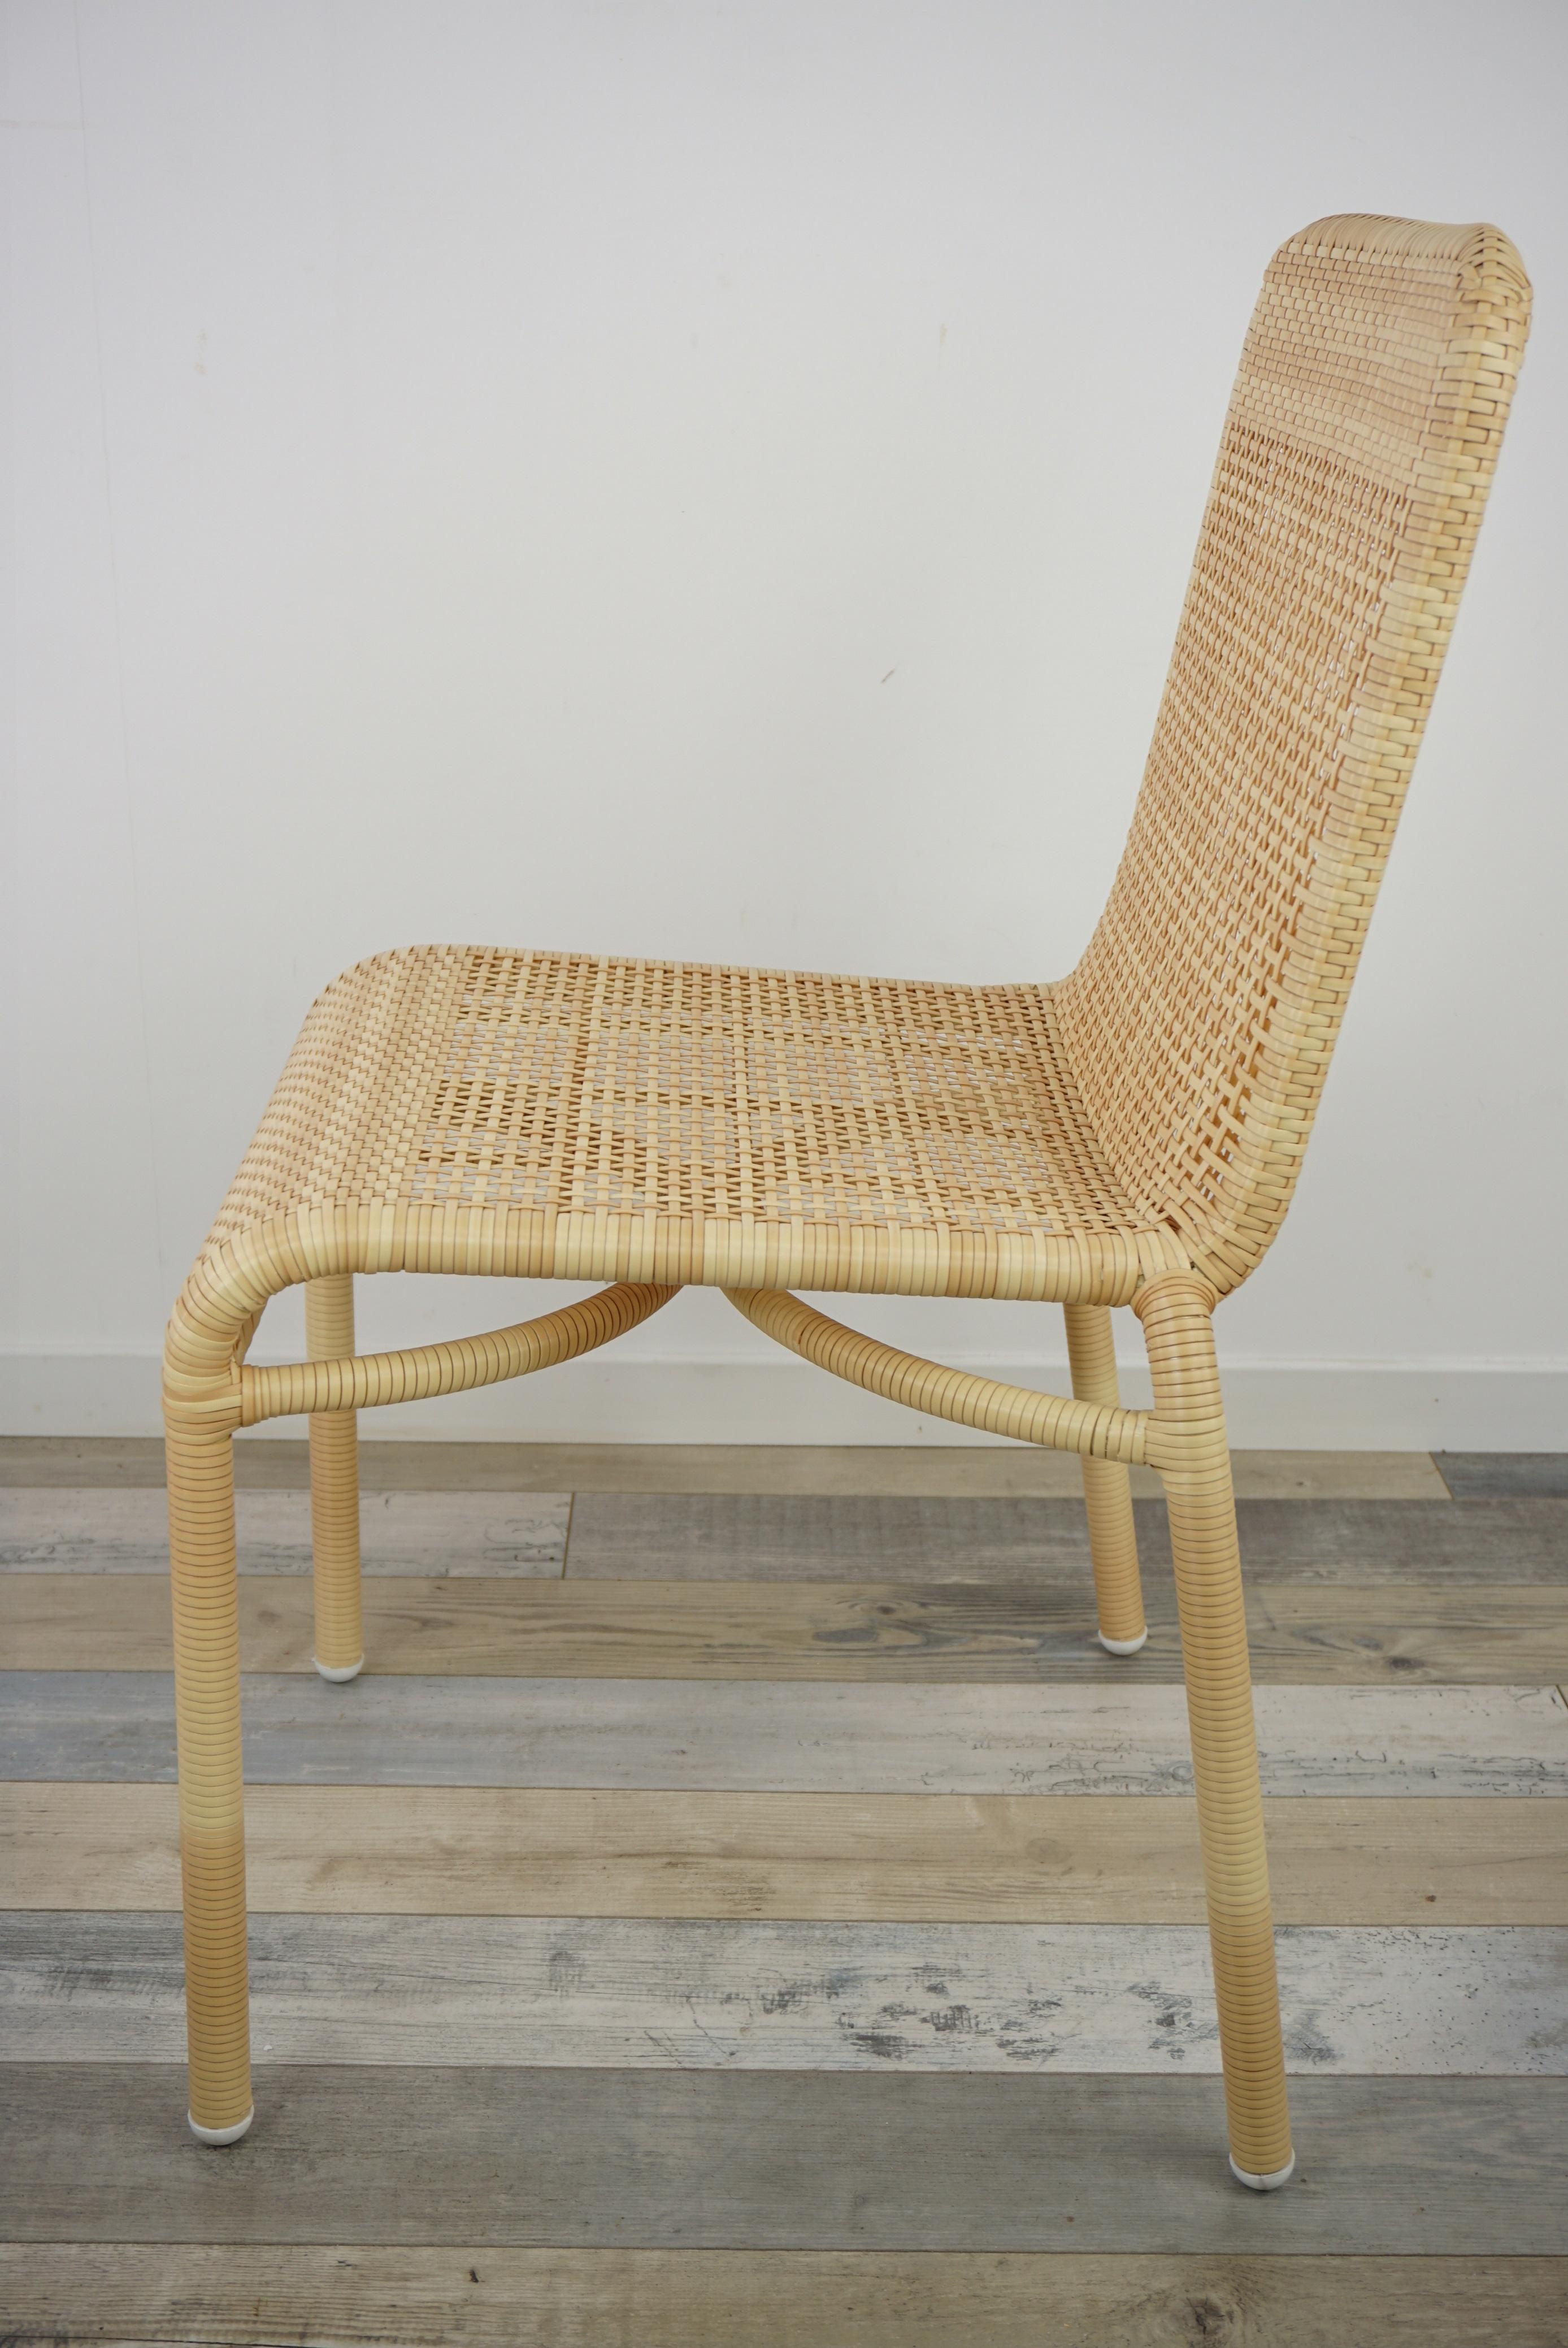 French Rattan Effect Braided Resin Outdoor Chair For Sale